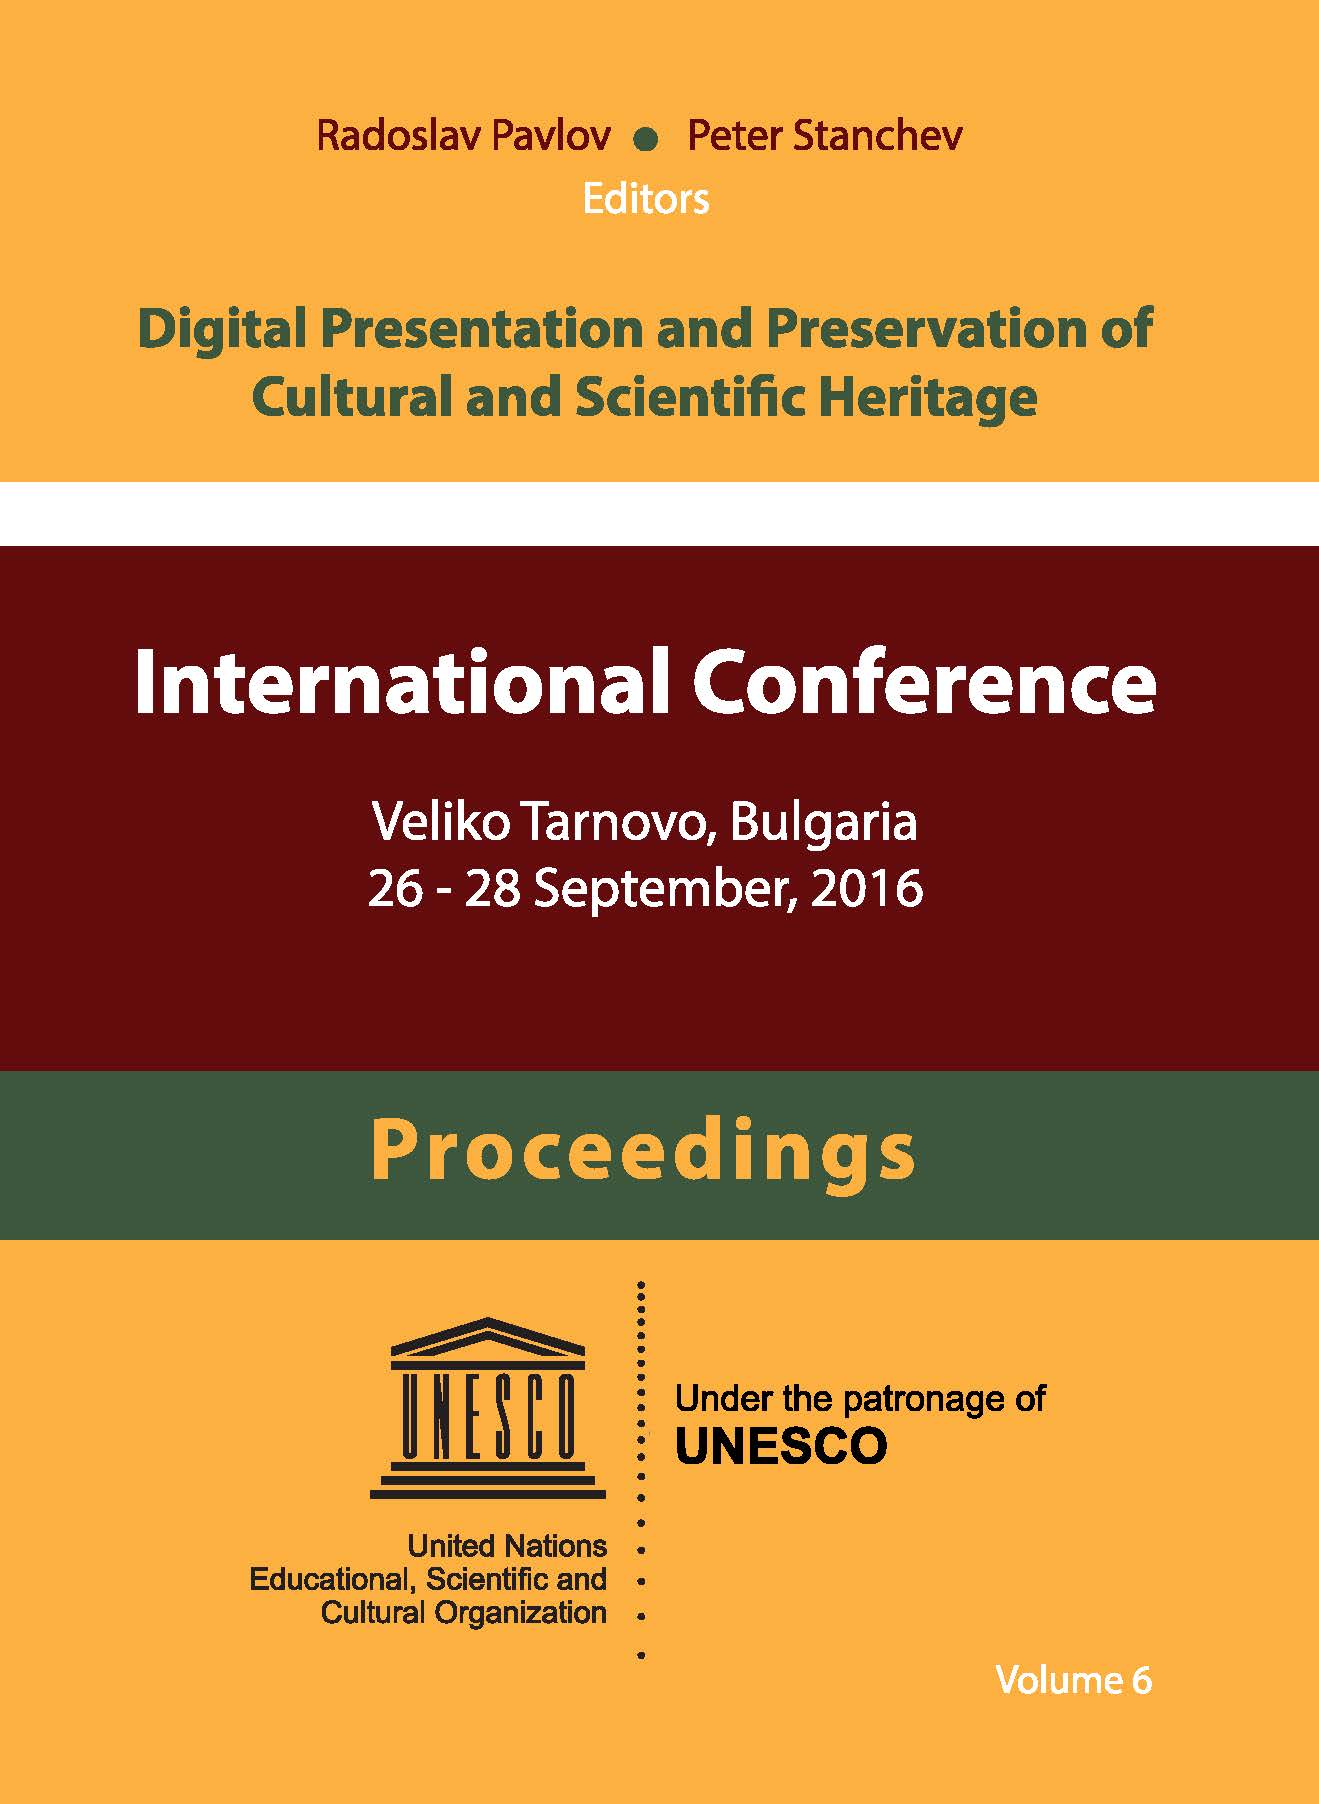 					View Vol. 6 (2016): Digital Presentation and Preservation of Cultural and Scientific Heritage
				